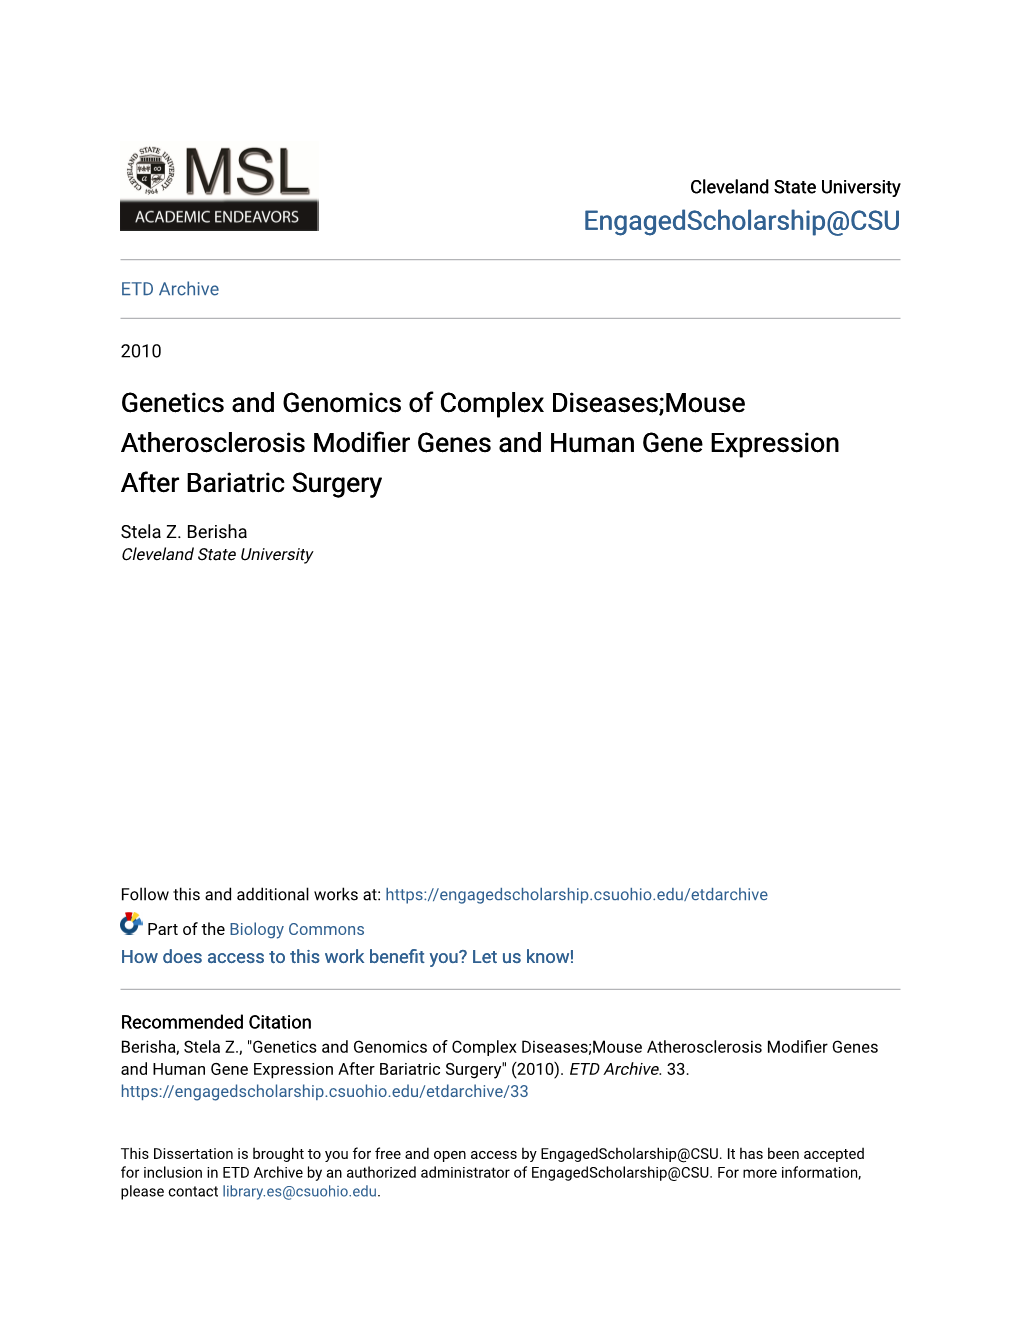 Genetics and Genomics of Complex Diseases;Mouse Atherosclerosis Modifier Genes and Human Gene Expression After Bariatric Surgery